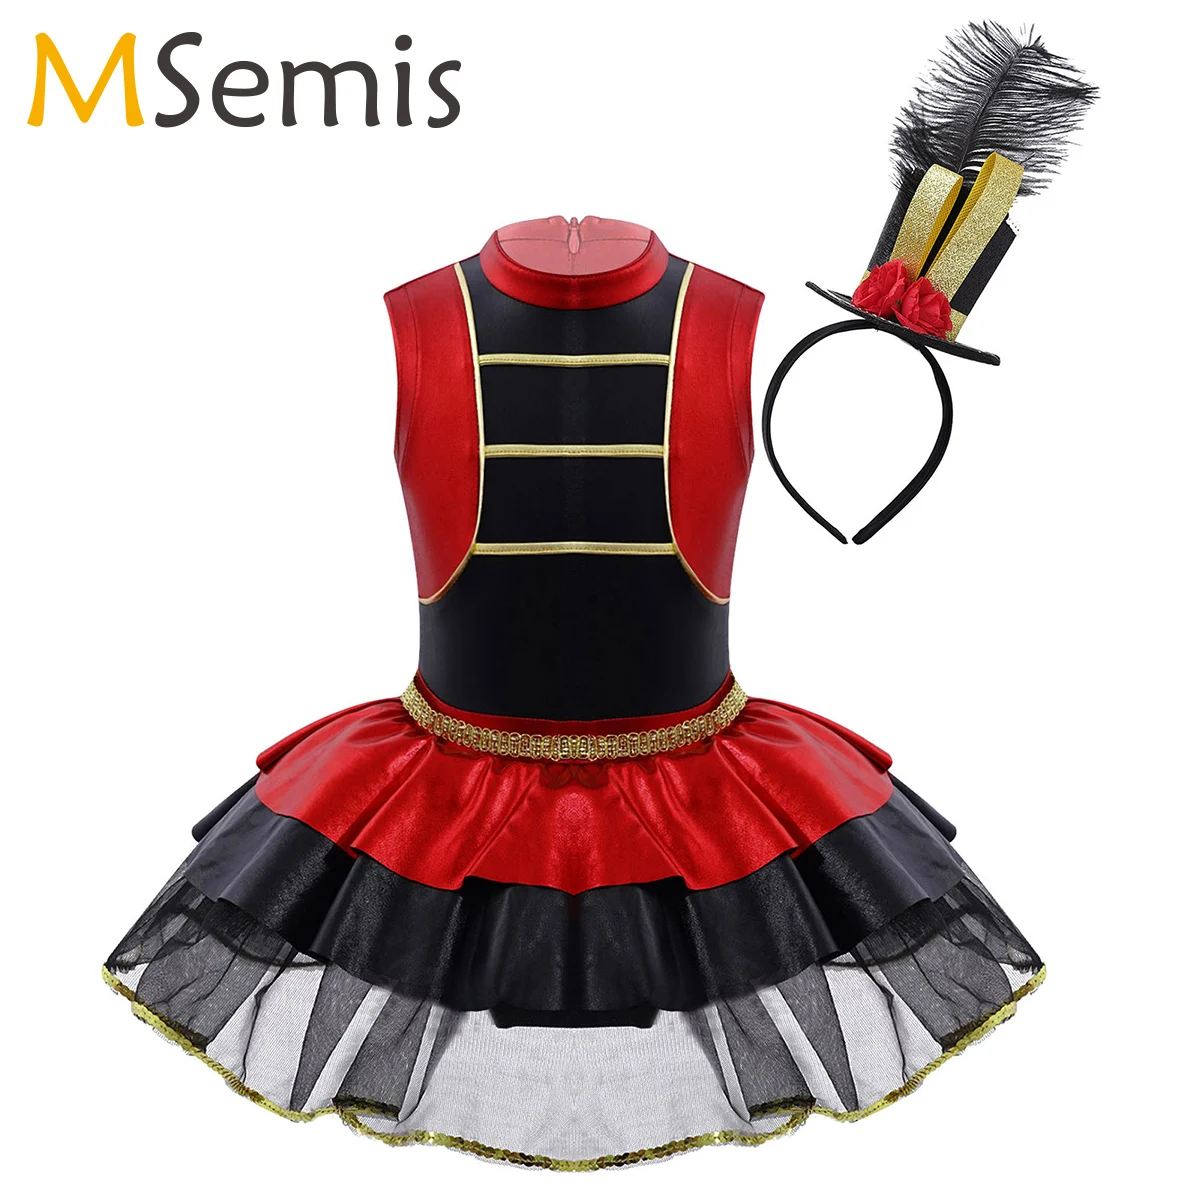 

Girls Circus Ringmaster Leotard Dress Shiny Sequins Showman Costumes with Feather Hat for Halloween Carnival Party Dress Up